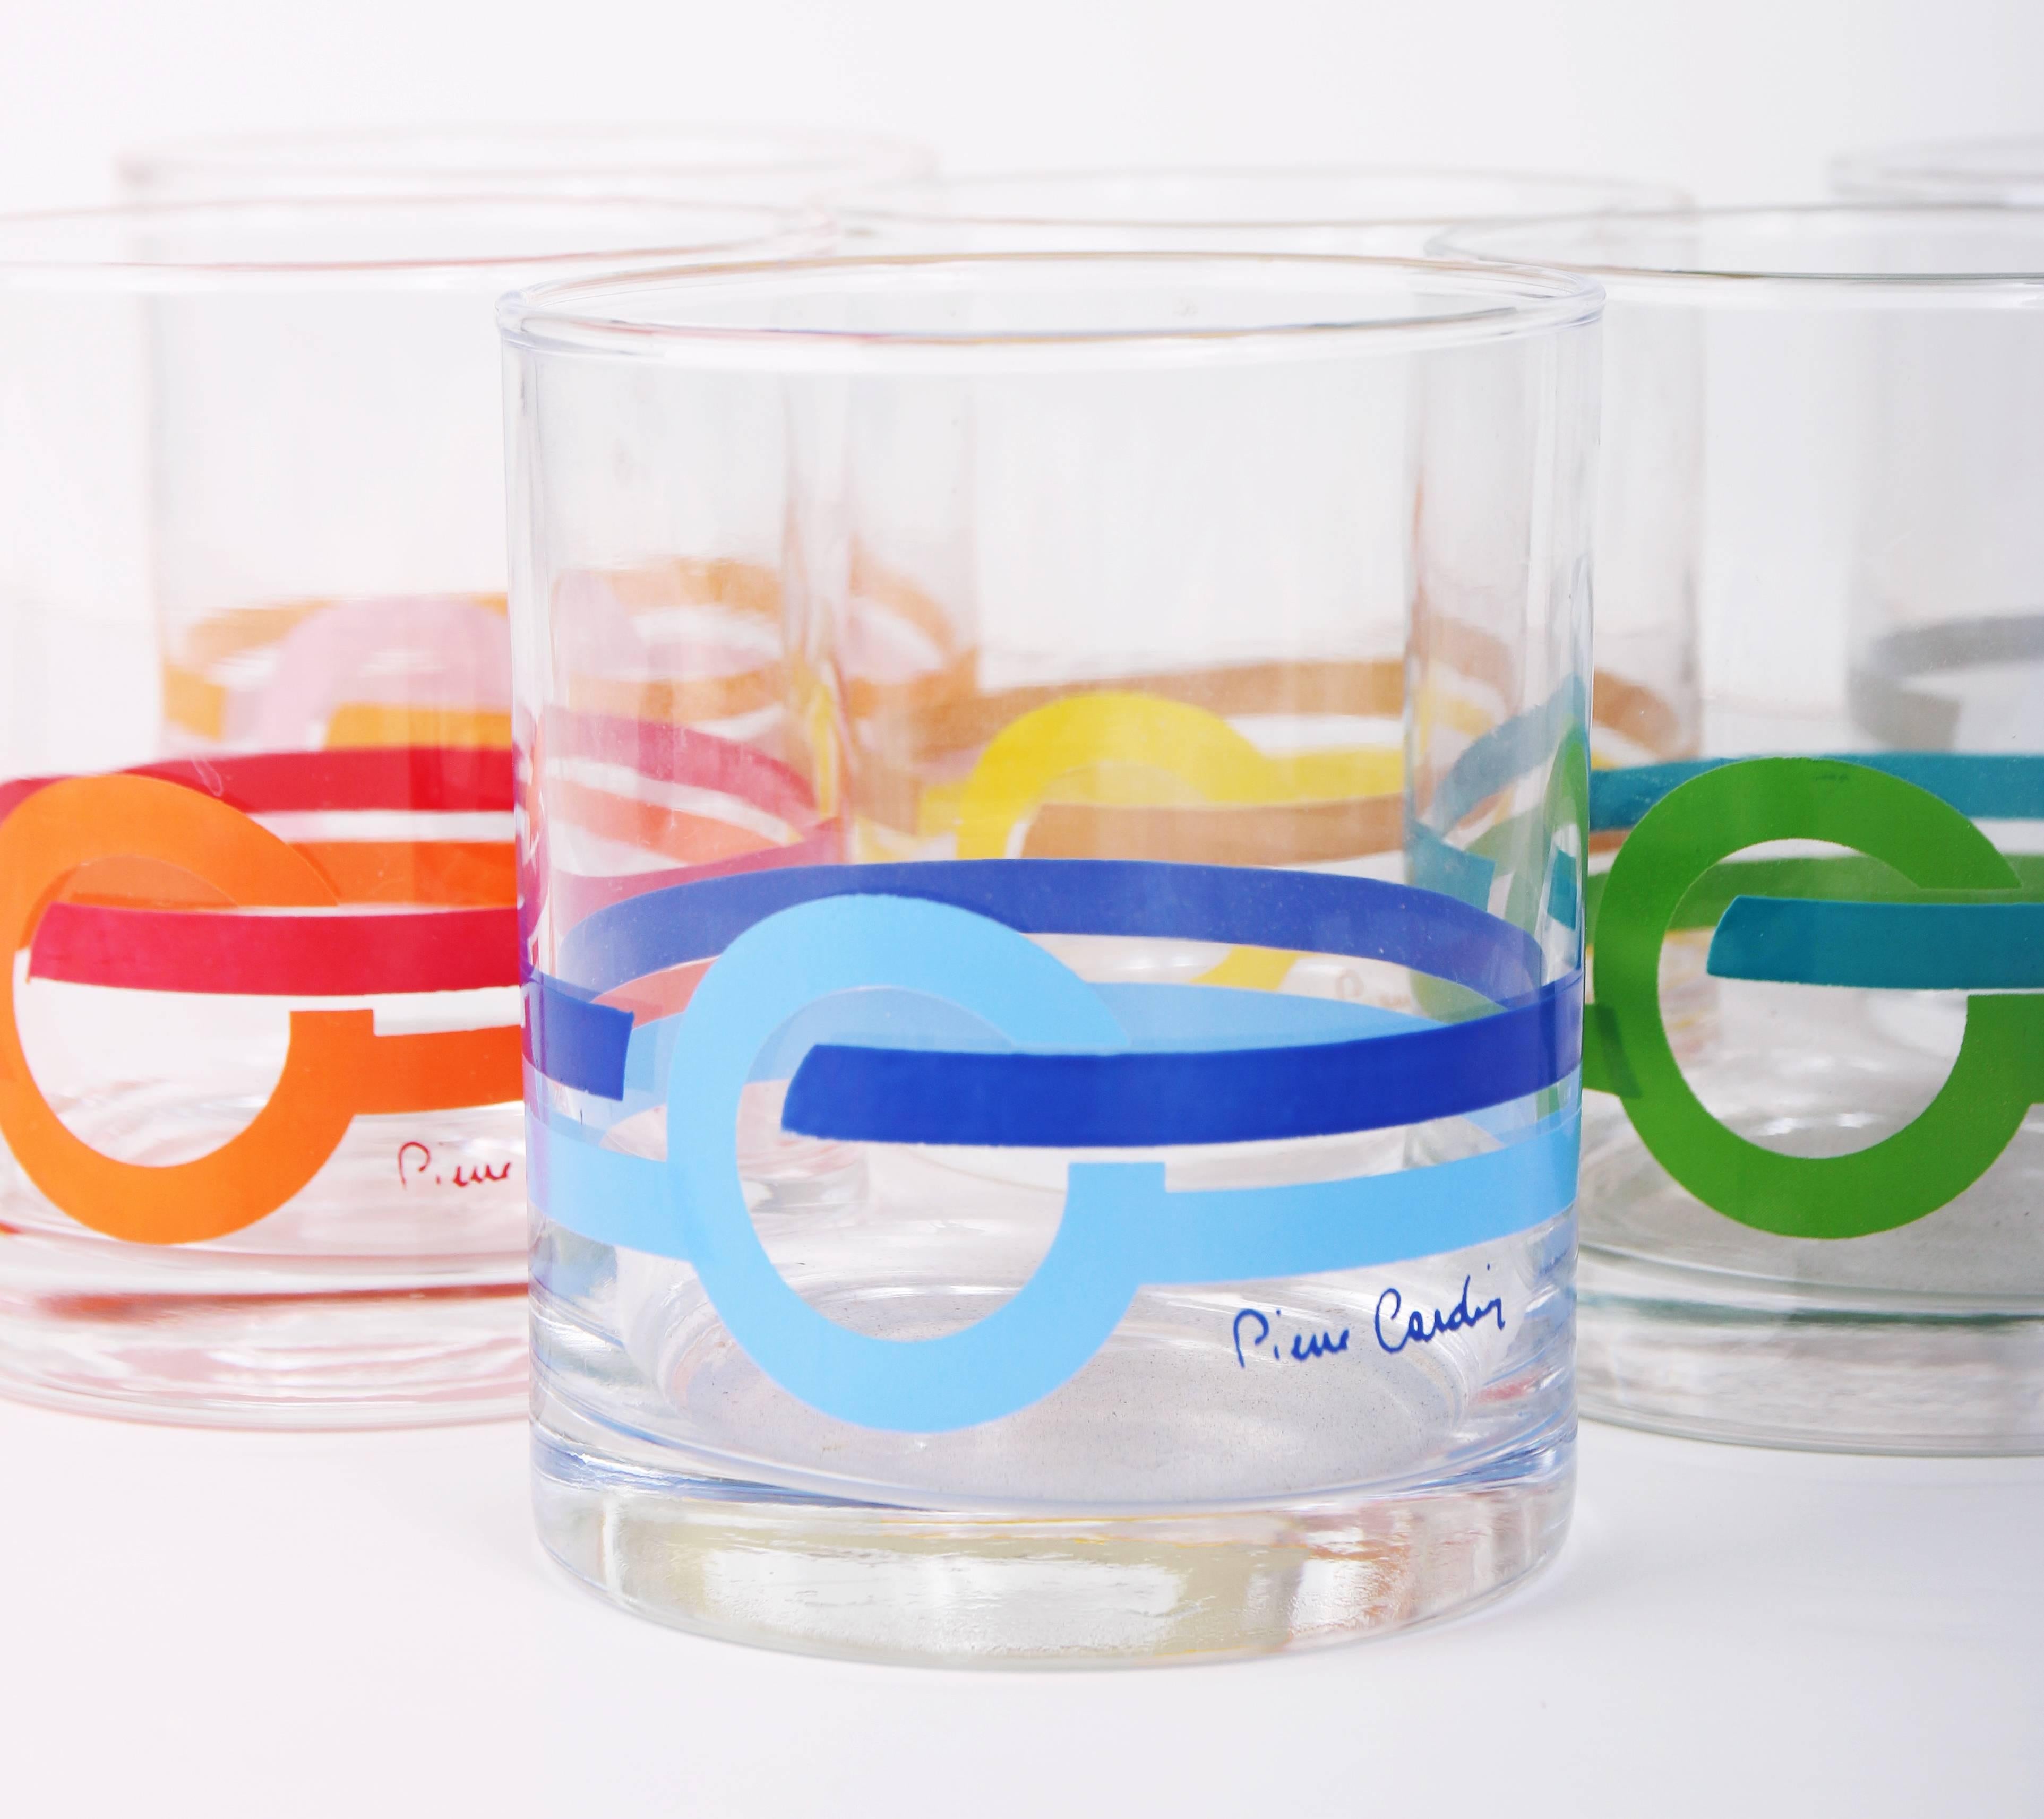 A set of 6 1970's signed Pierre Cardin multi-colored lowball drinking glasses with classic Cardin logo graphic at the bottom third. Holds roughly 10 ounces.
MEASUREMENTS:
Height - (approx.) 3 3/4